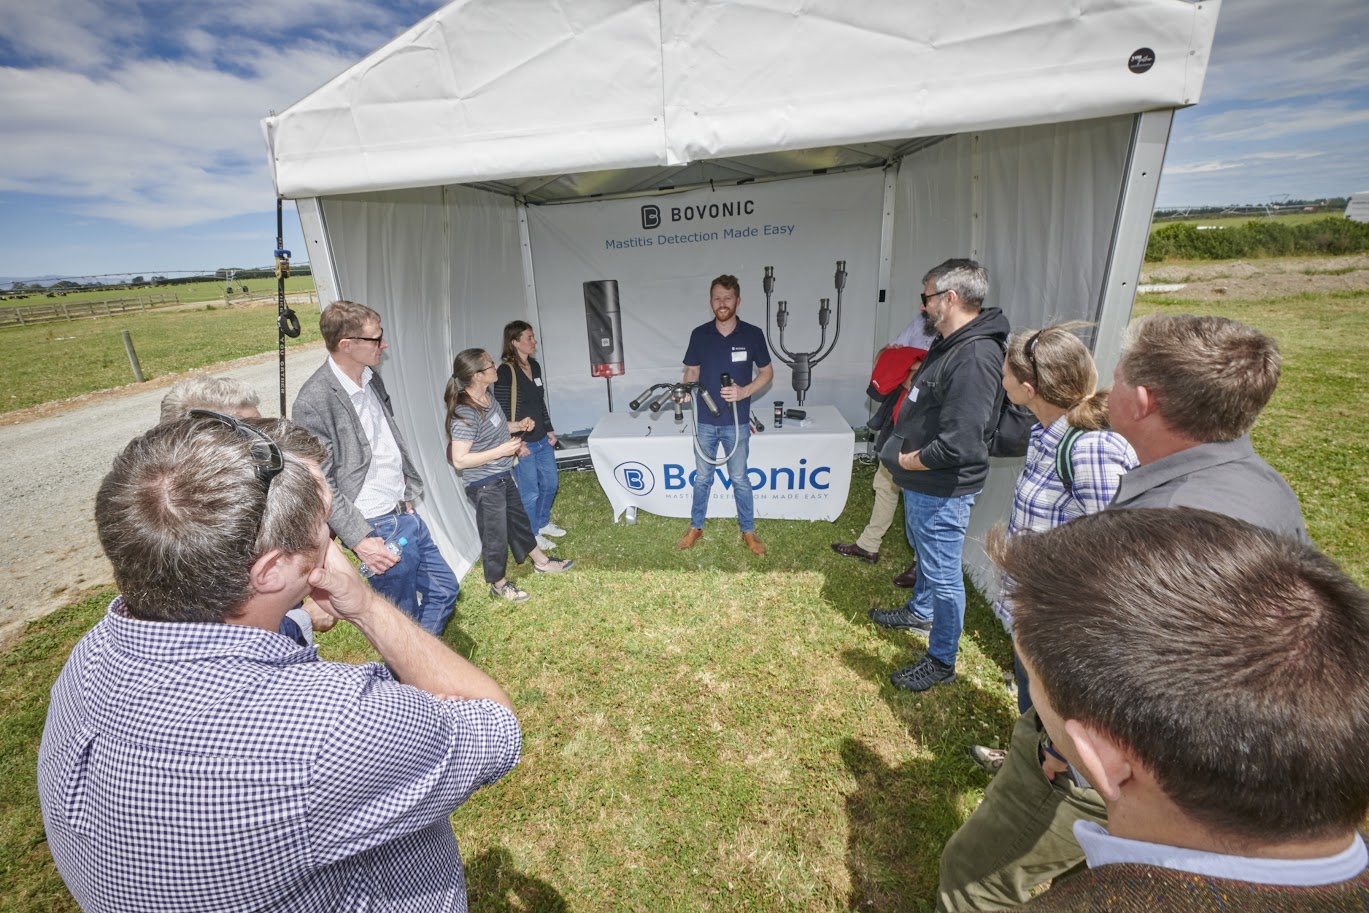 Liam Kampshof, Founder of Bovonic, at our Agitech in the Dairy event in November